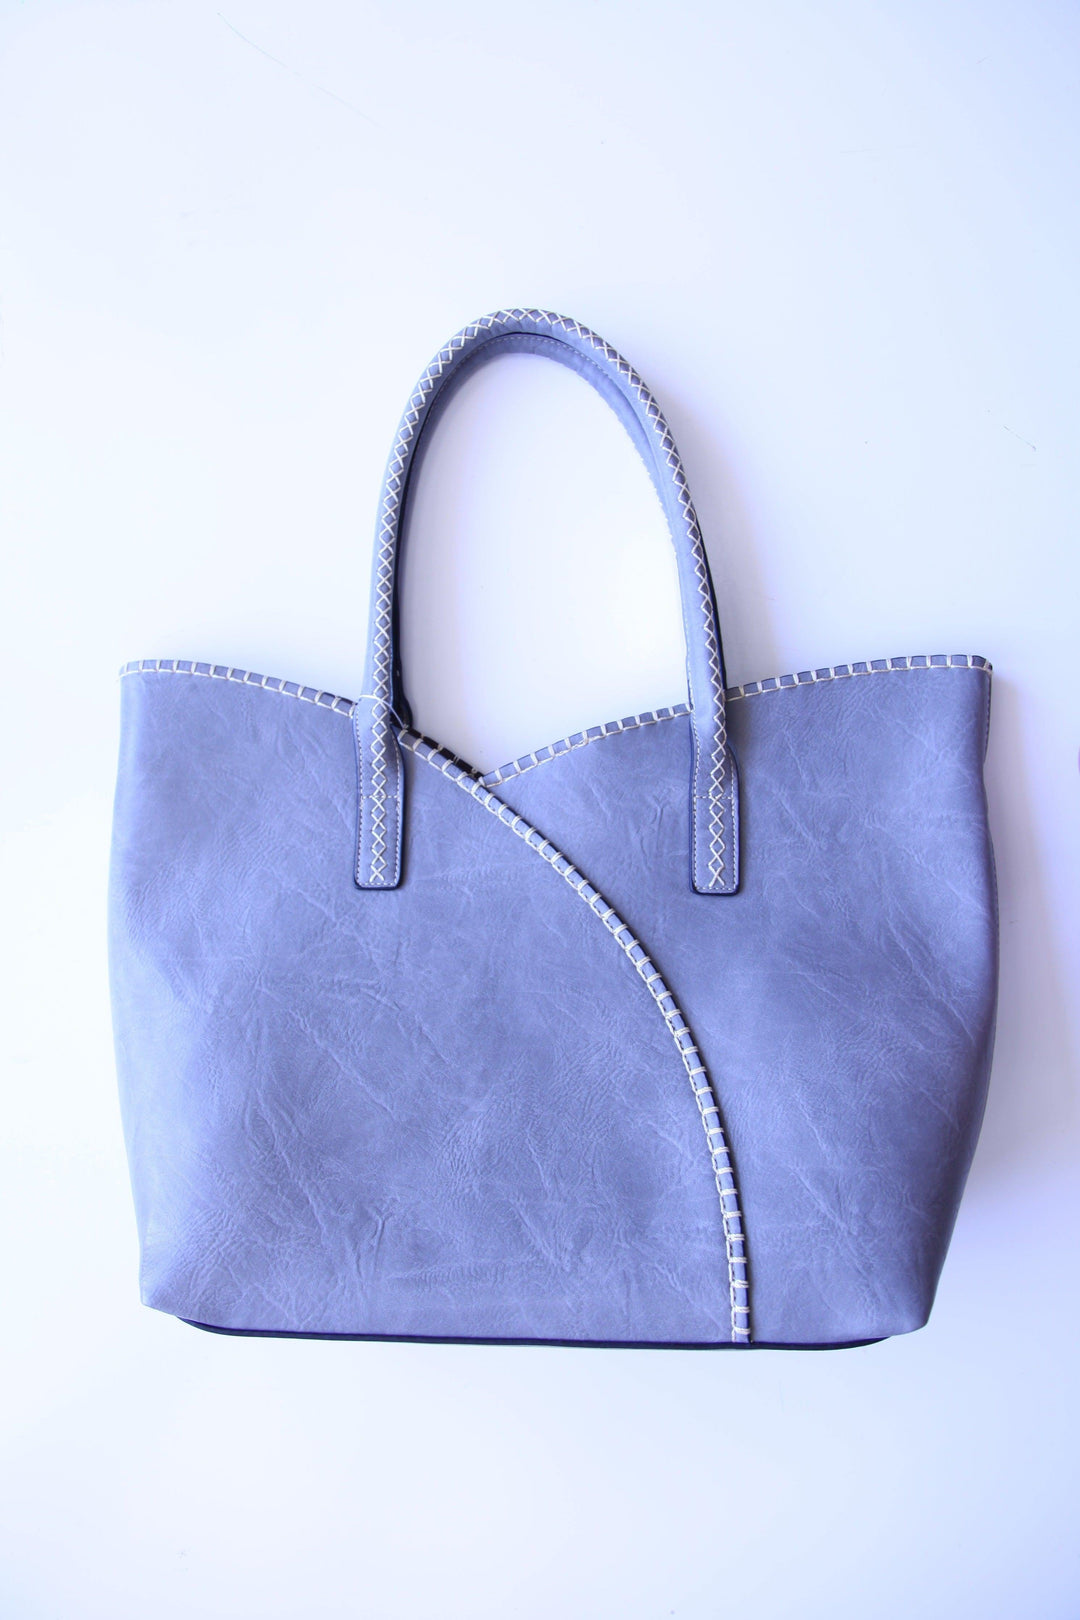 tres chic clothing grey tote